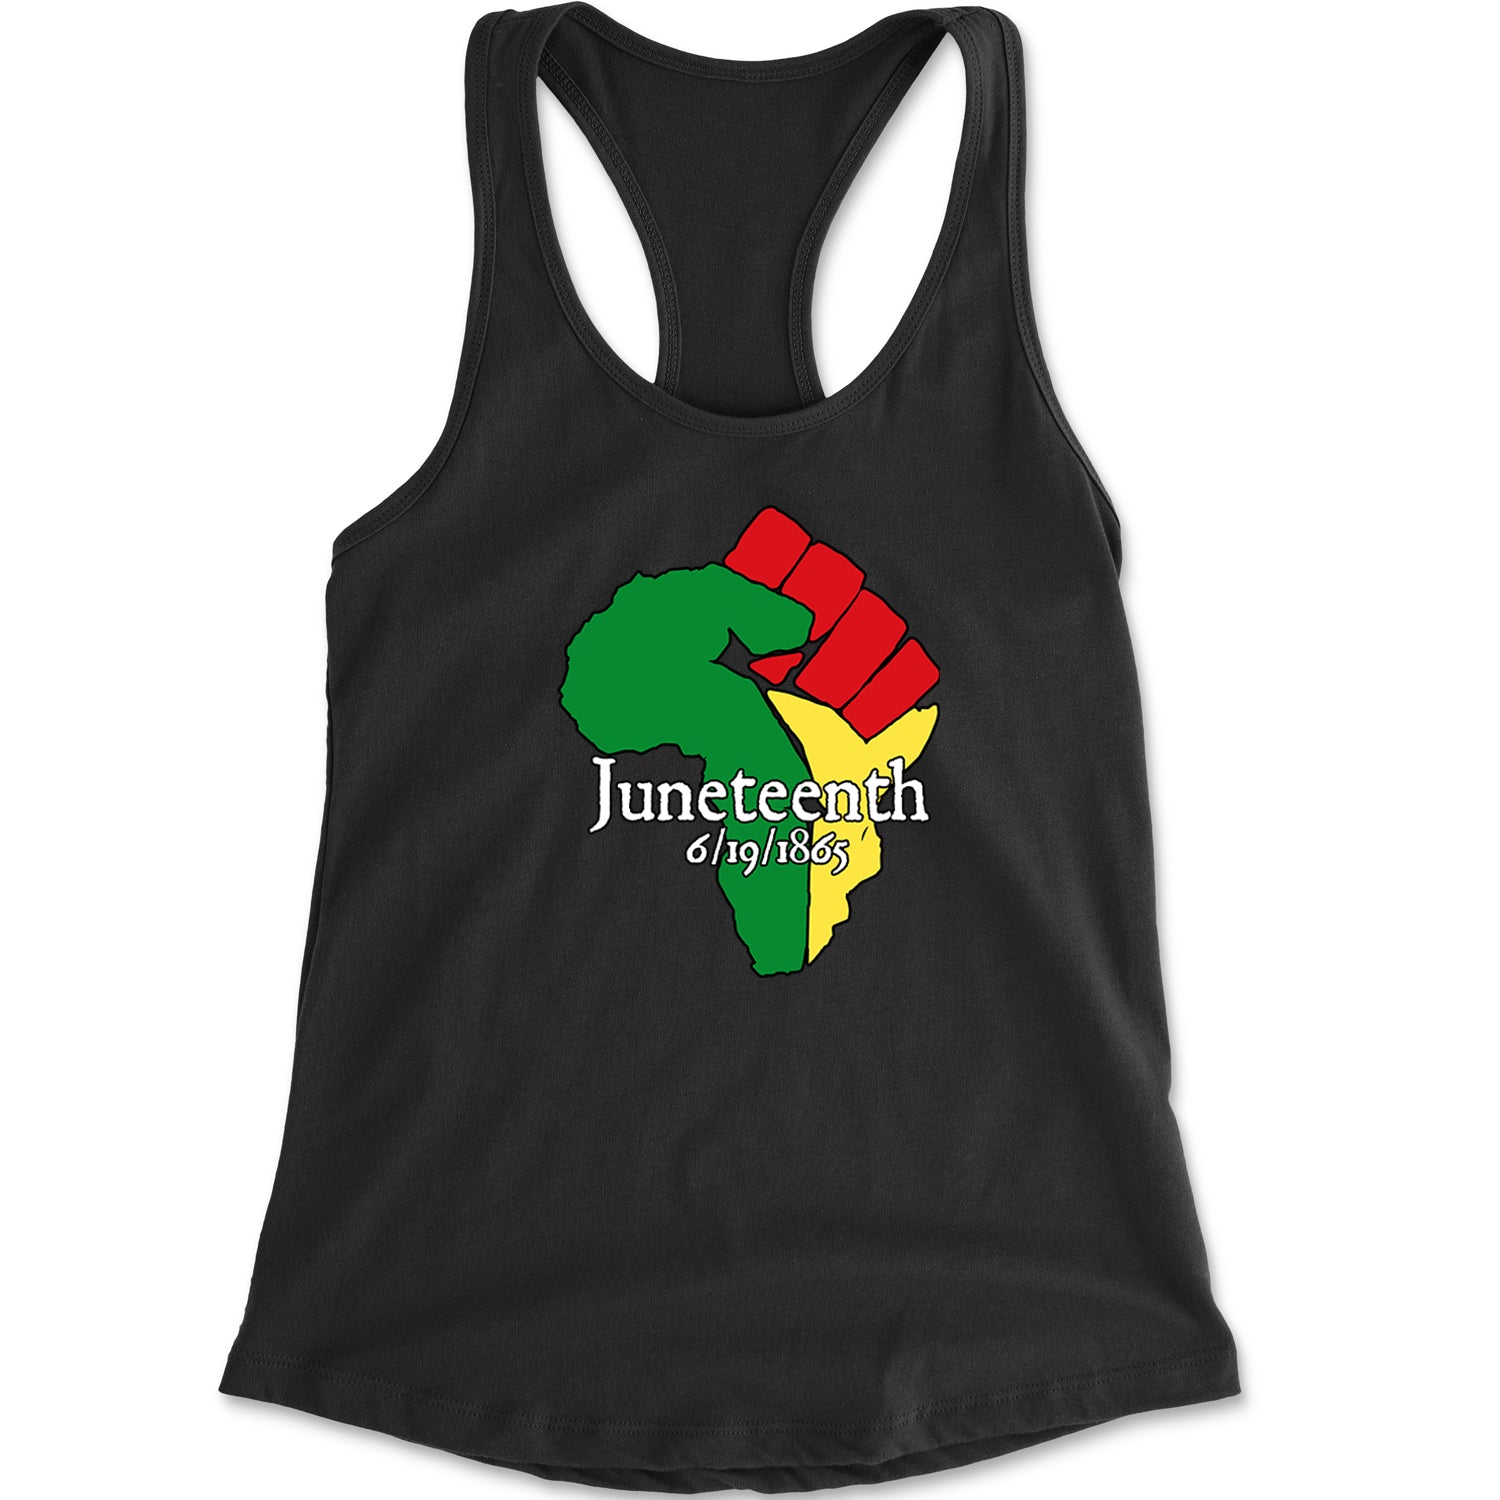 Juneteenth Raised Fist Africa Celebrate Emancipation Day Racerback Tank Top for Women